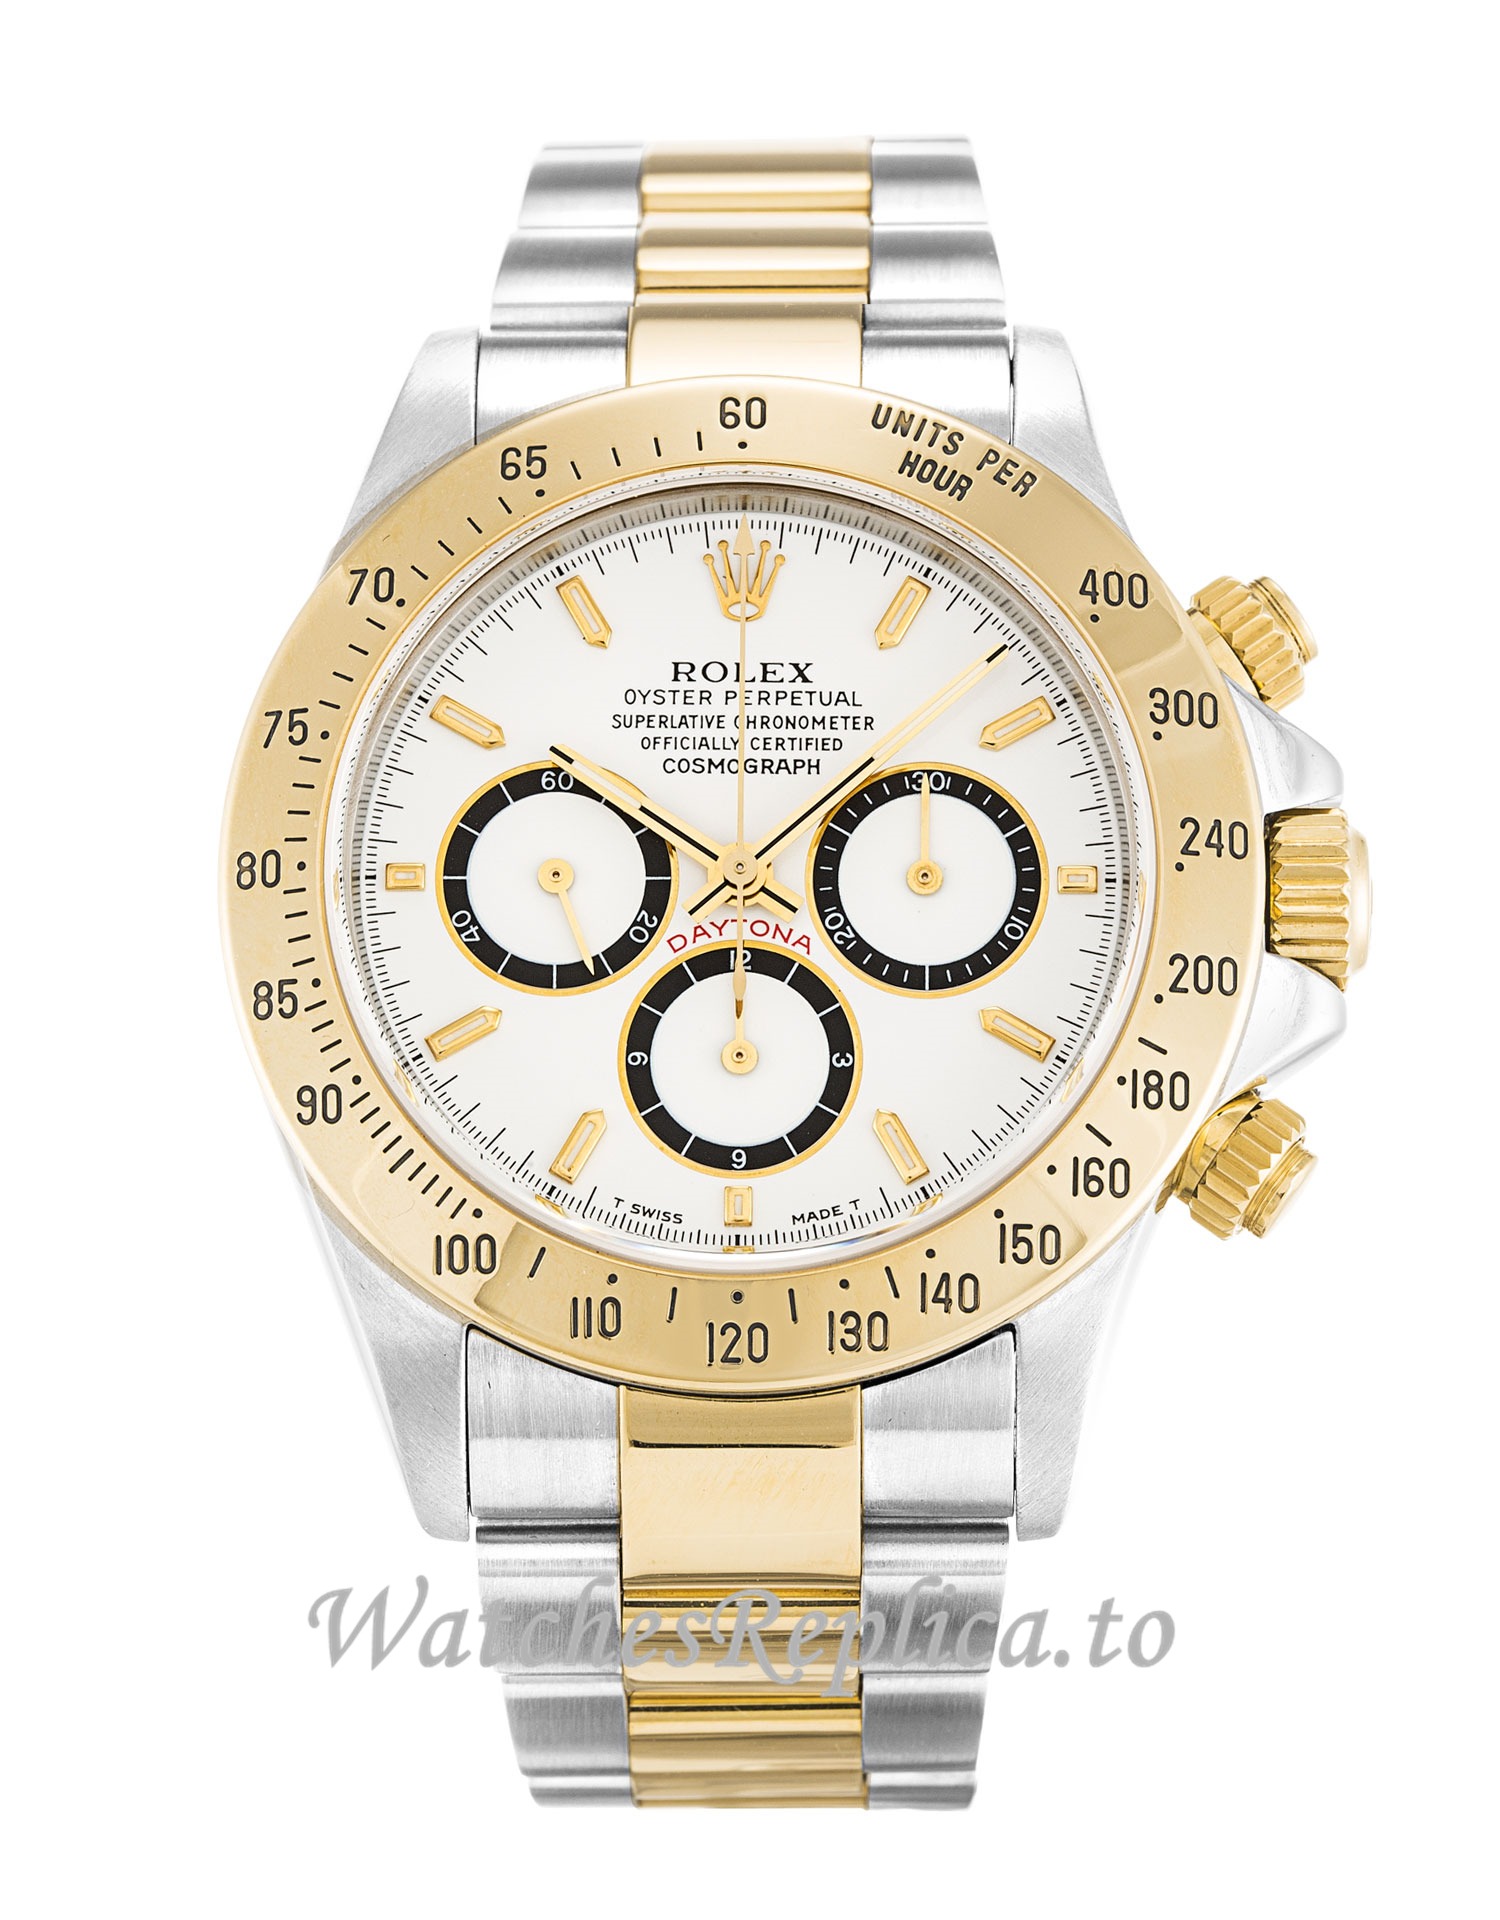 price for rolex watch